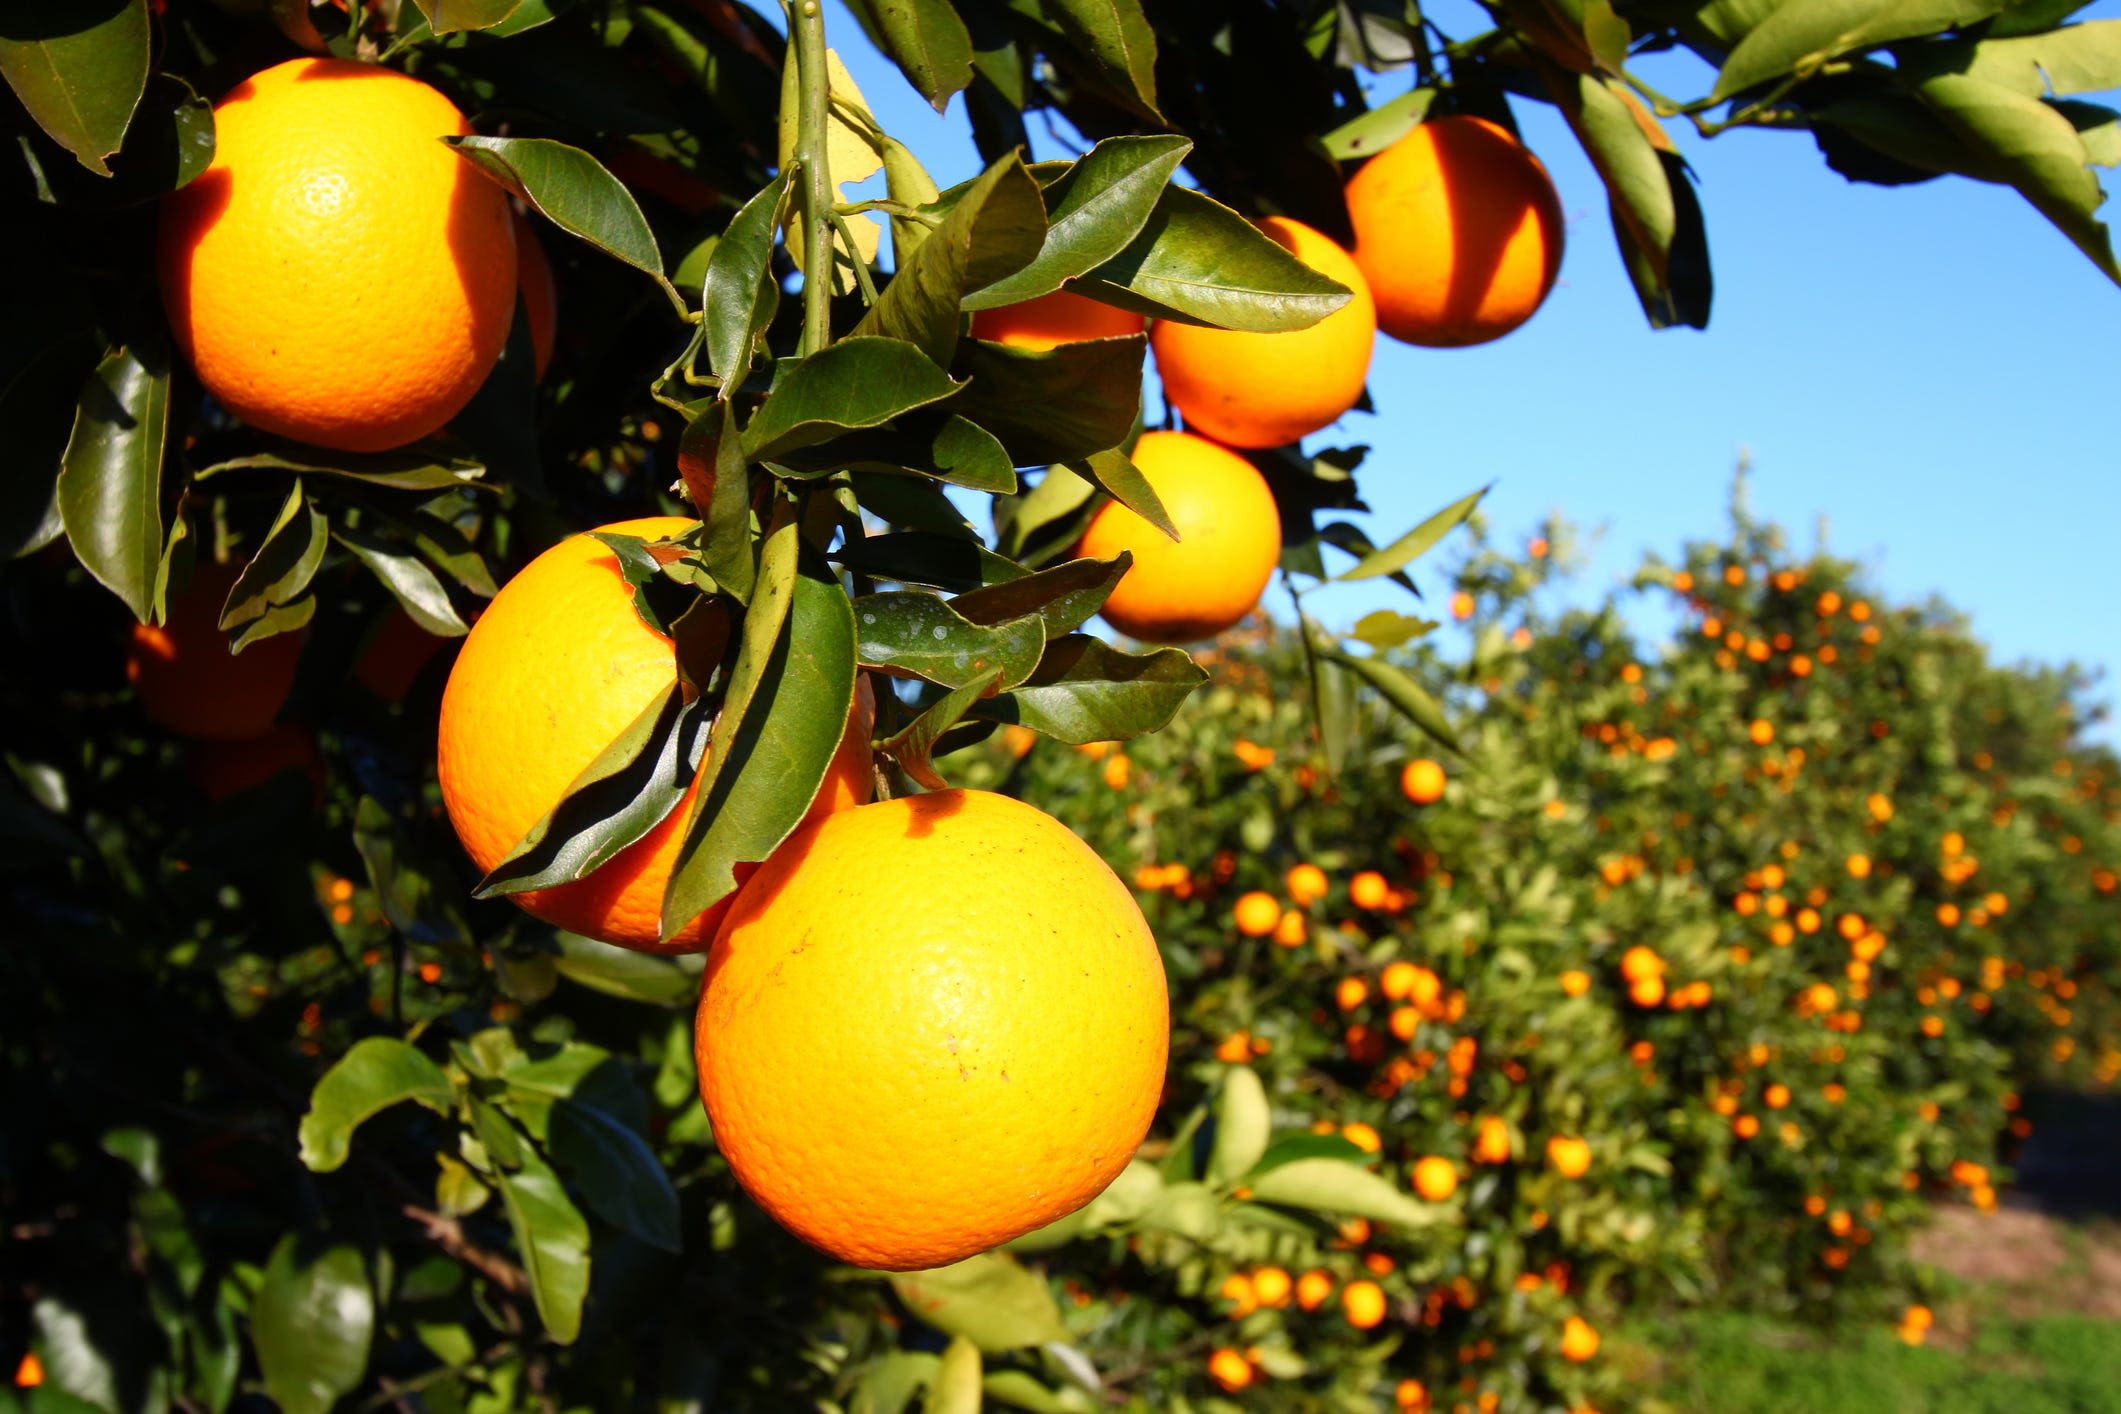 Sign of the times: Gulf Citrus Growers Association shuts down as industry struggles